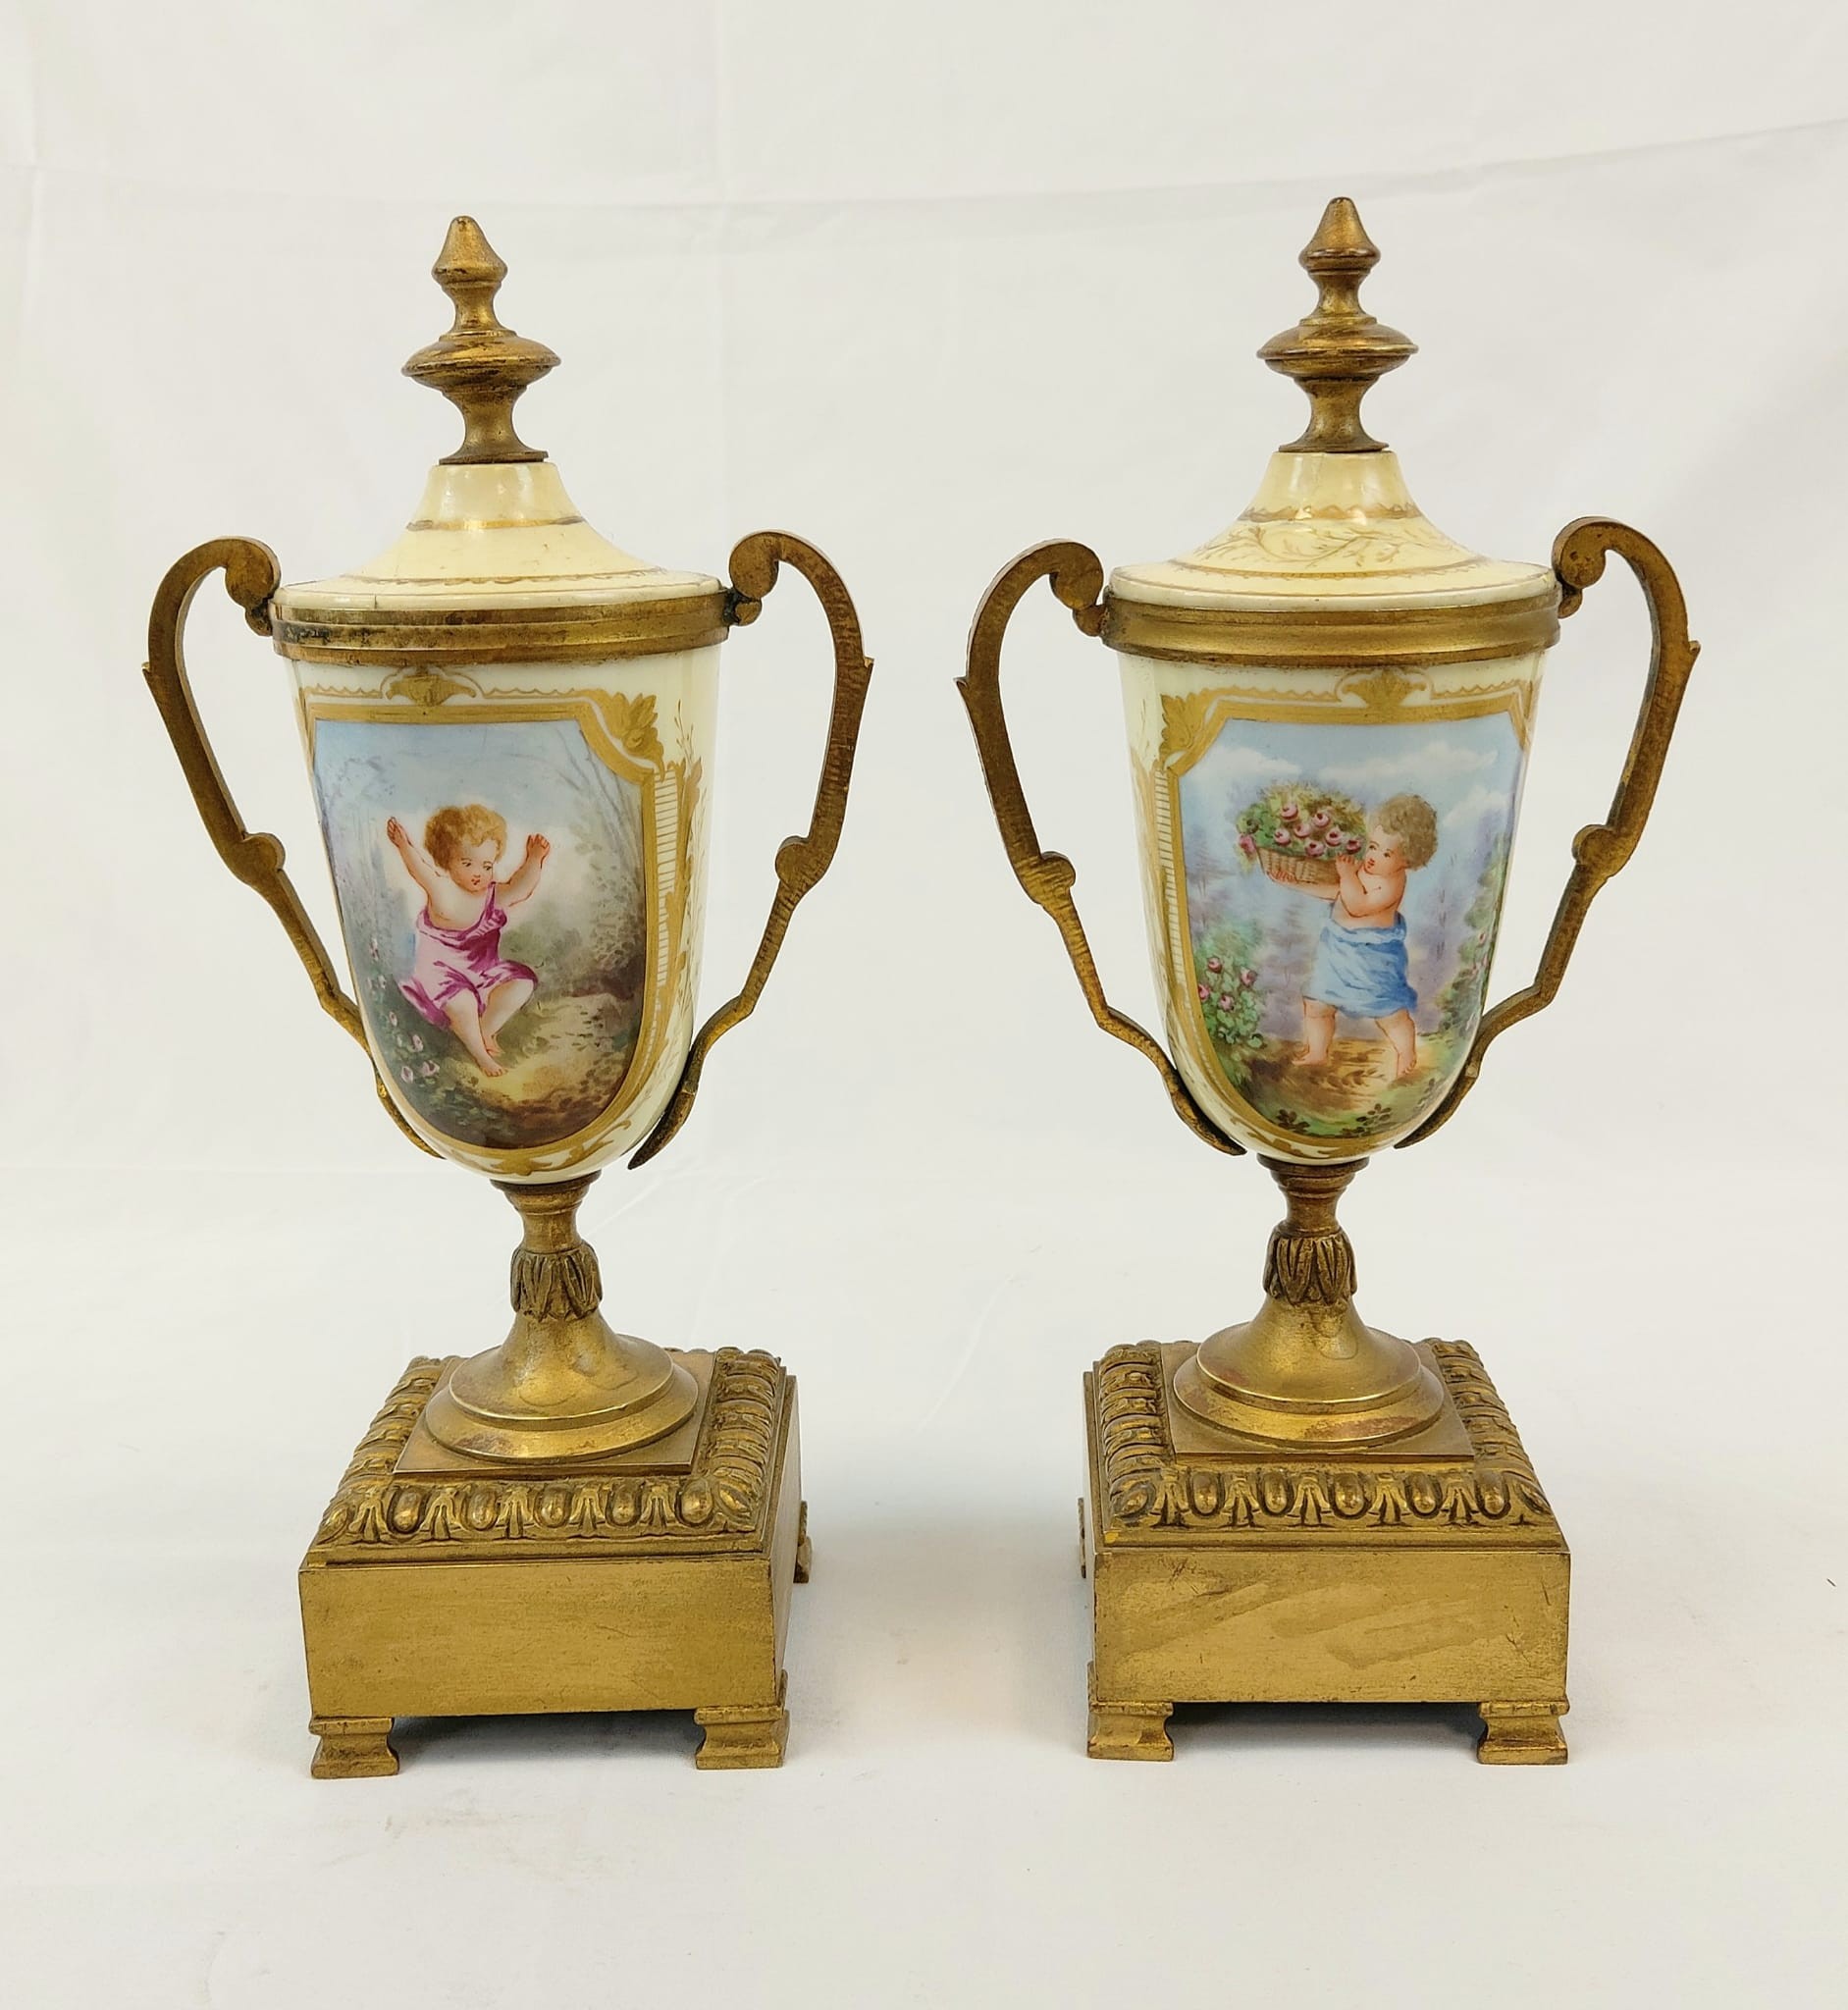 A French Hand-Painted Porcelain and Brass Mantel Clock with Accompanying Pedestalled Chalices. A/F - Image 9 of 11